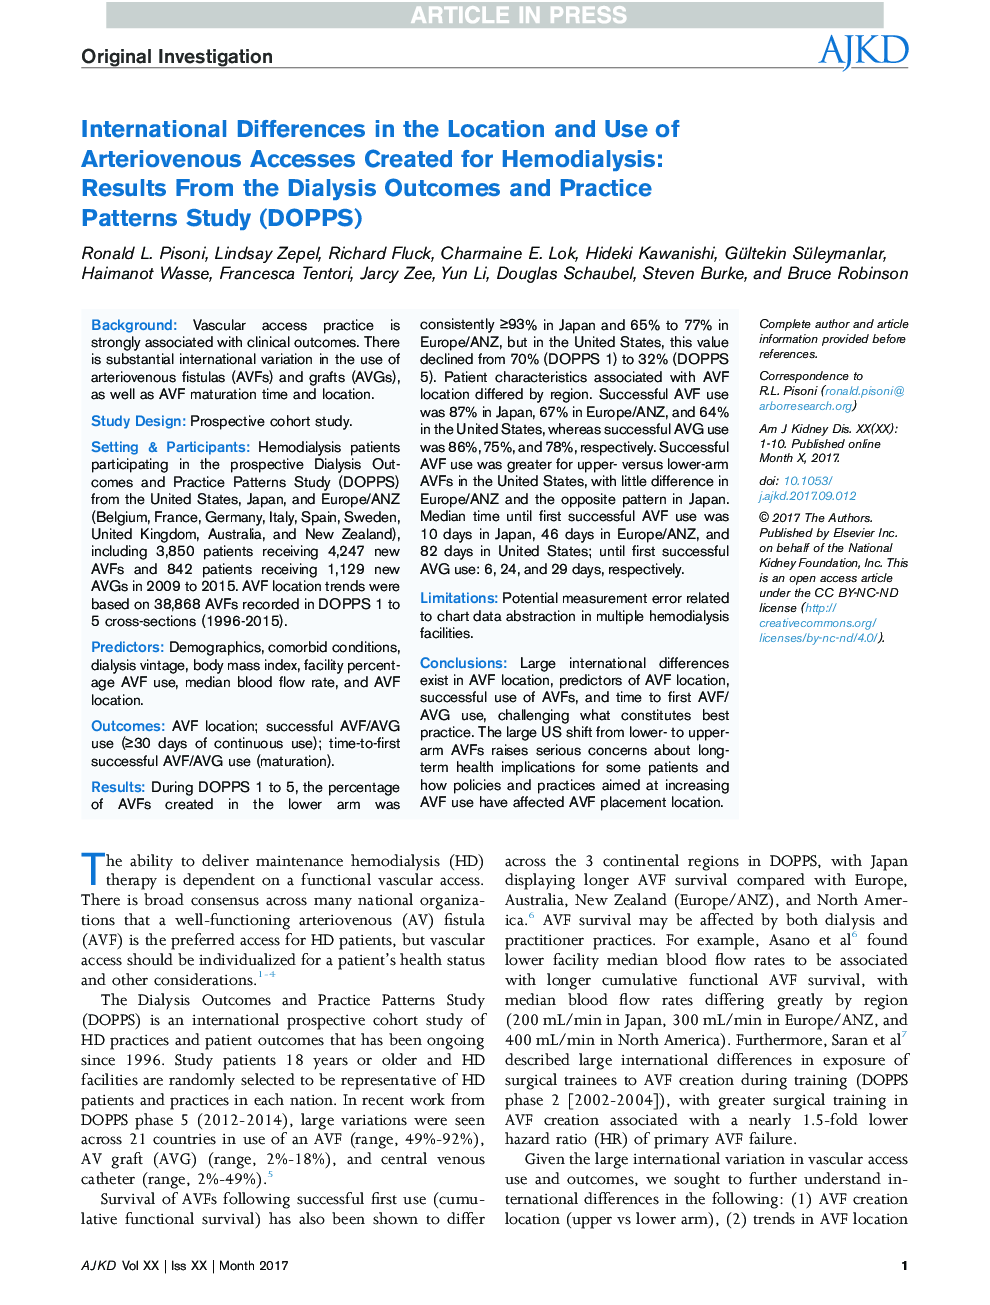 International Differences in the Location and Use of Arteriovenous Accesses Created for Hemodialysis: Results From the Dialysis Outcomes and Practice Patterns Study (DOPPS)